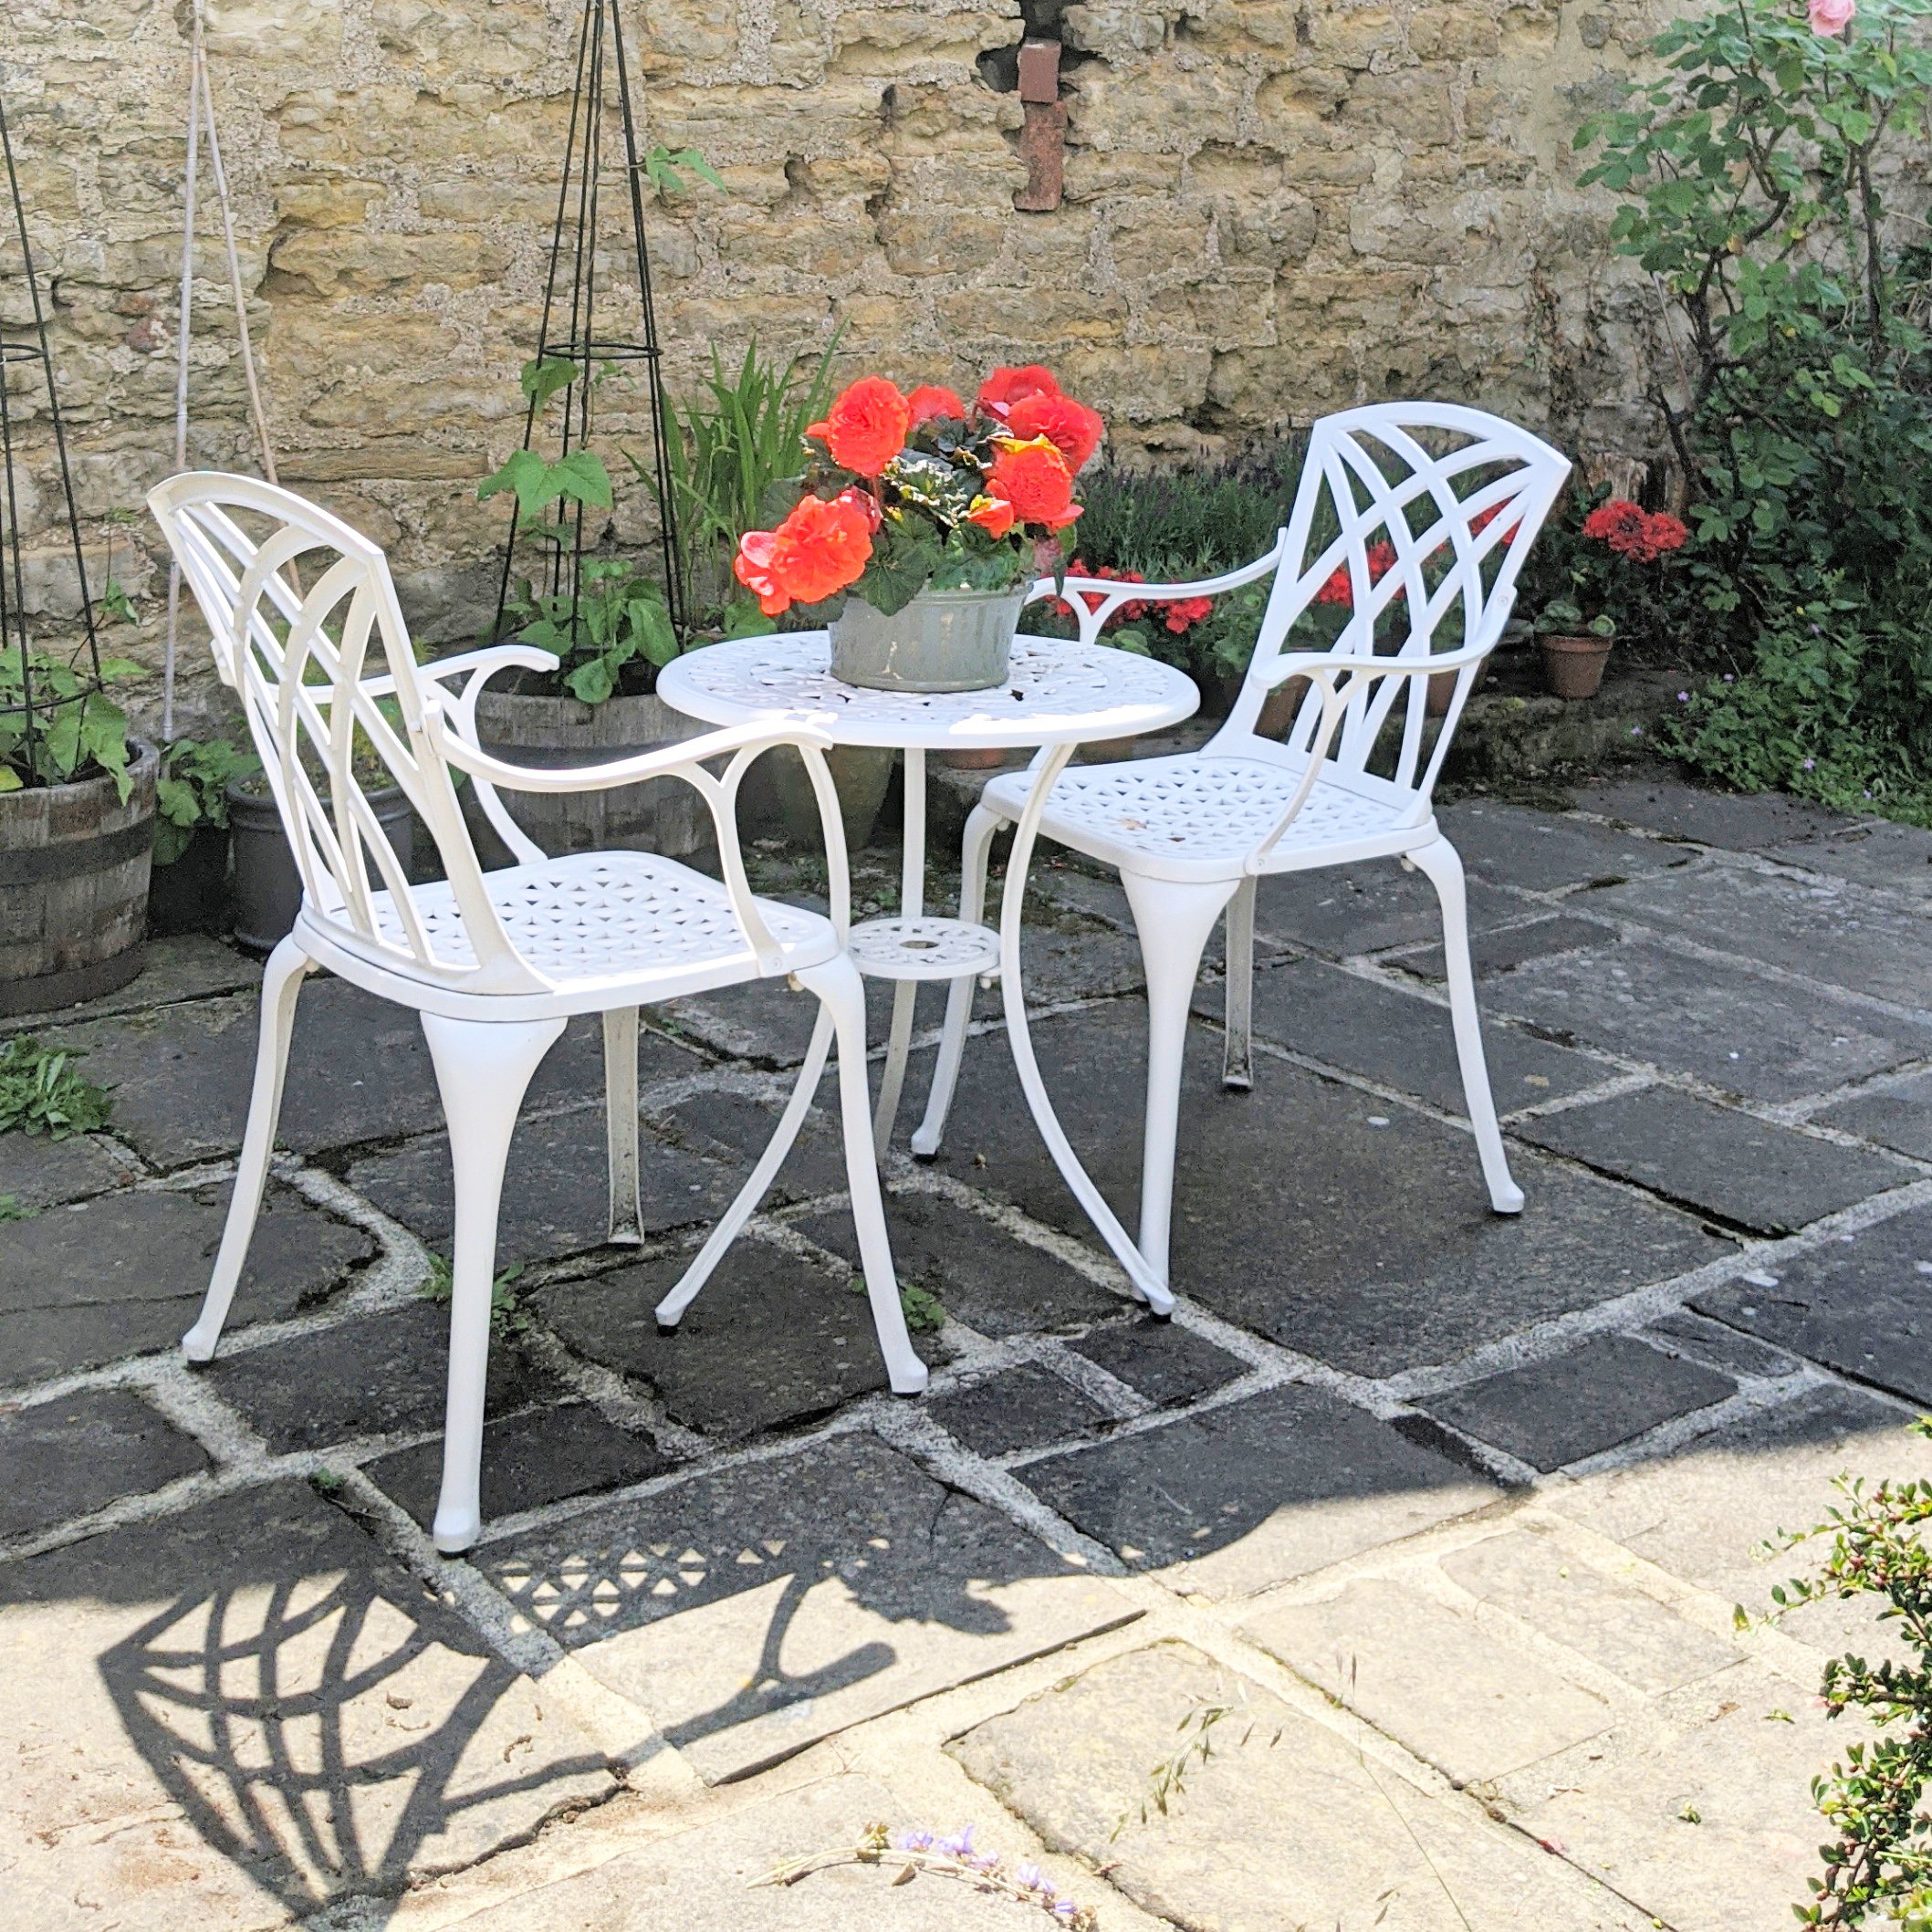 Garden Table Centrepiece | Work with the shape of your garden table